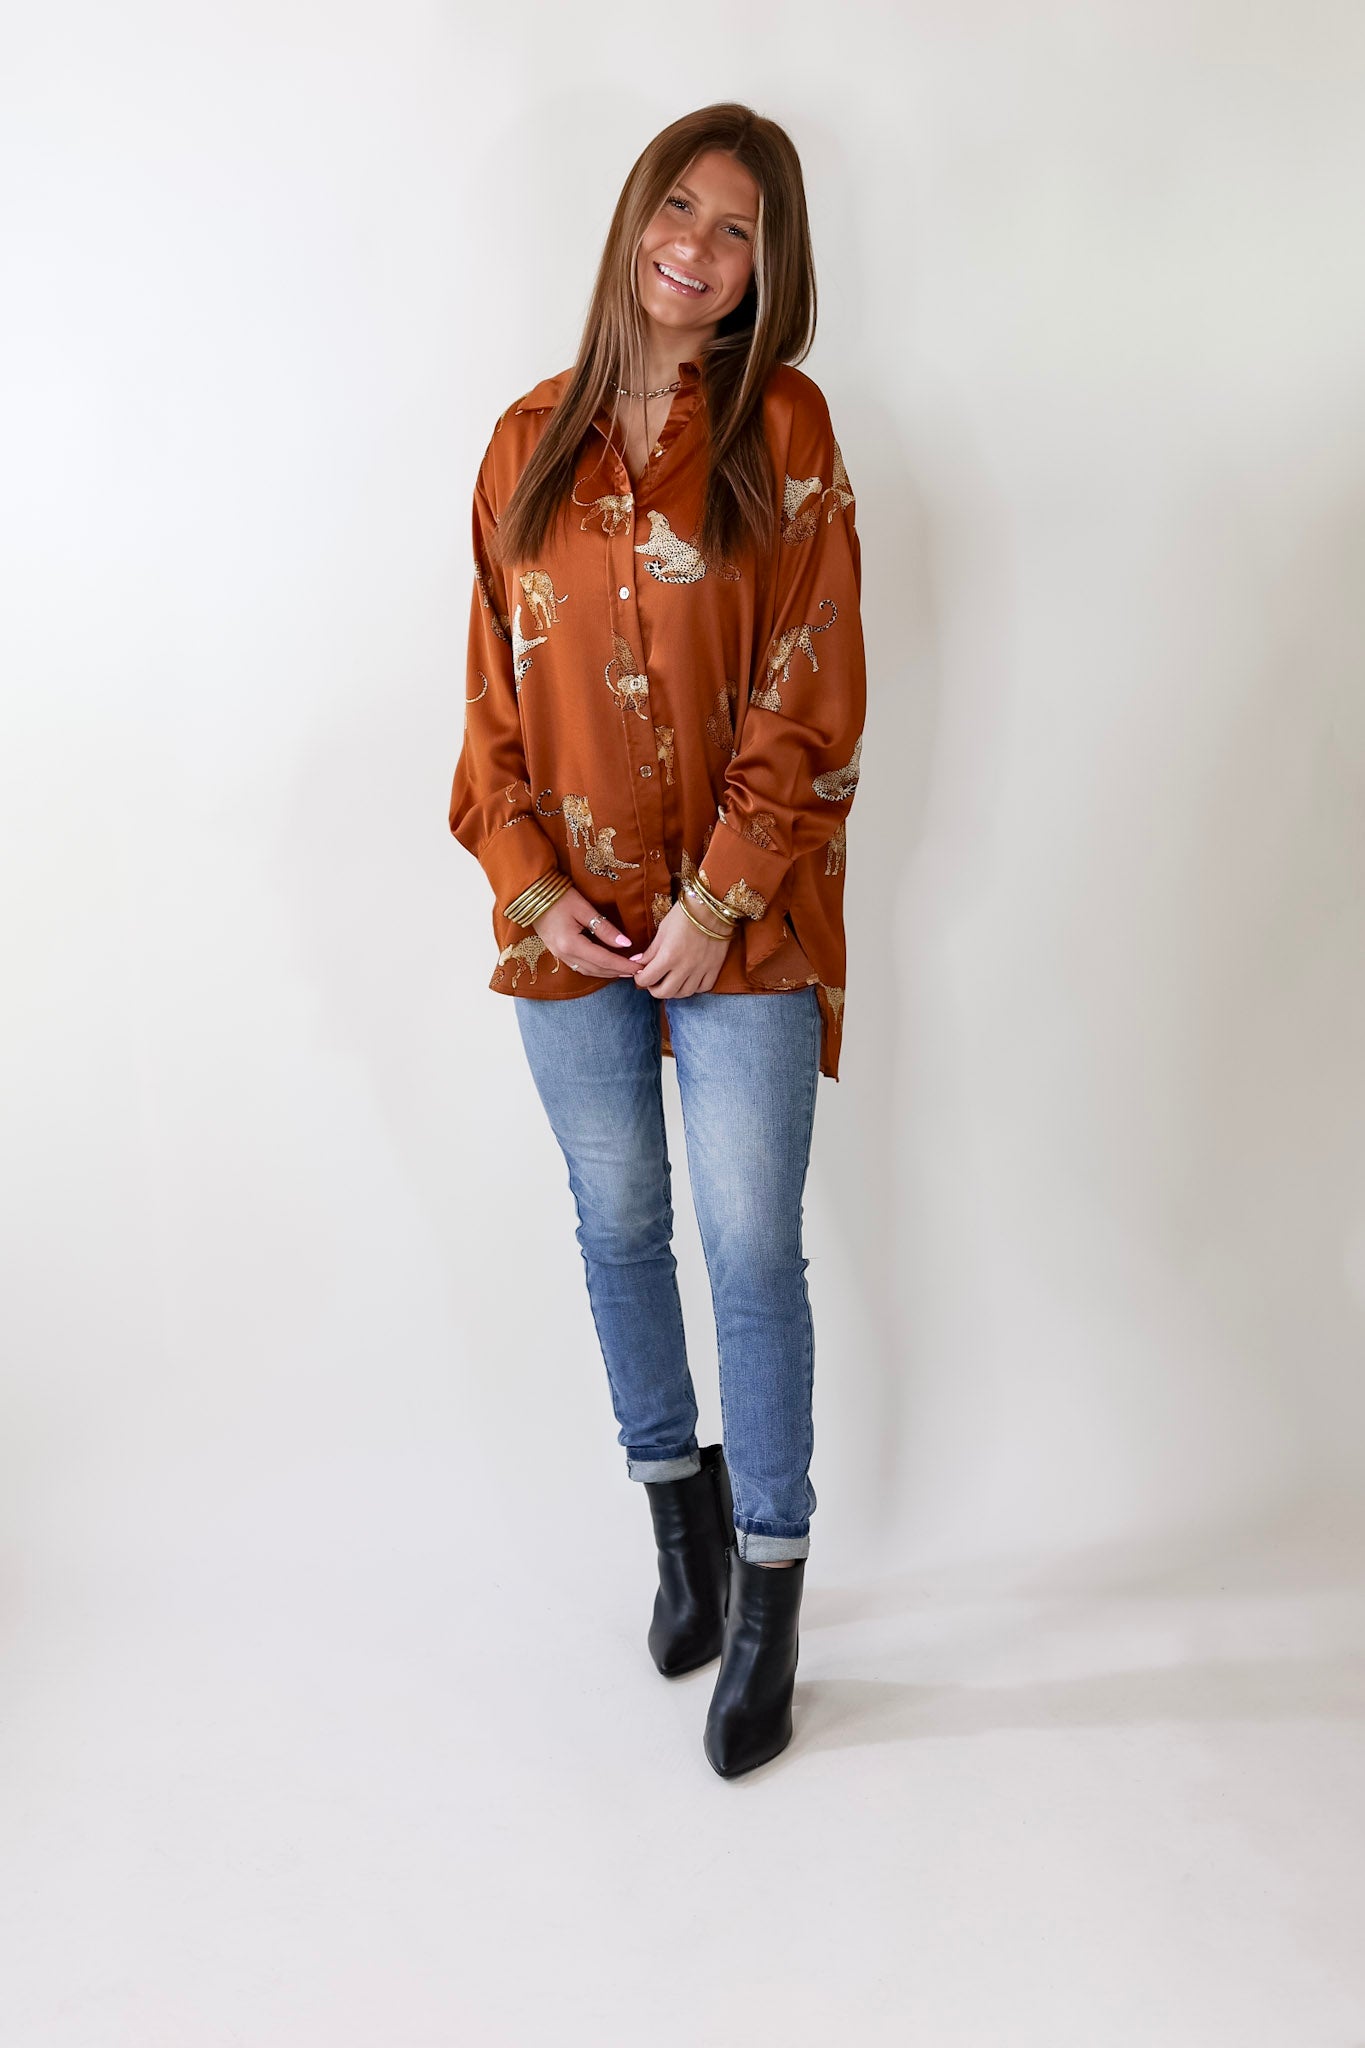 Tell Me Something Good Cheetah Print Long Sleeve Button Up Top in Camel Brown - Giddy Up Glamour Boutique